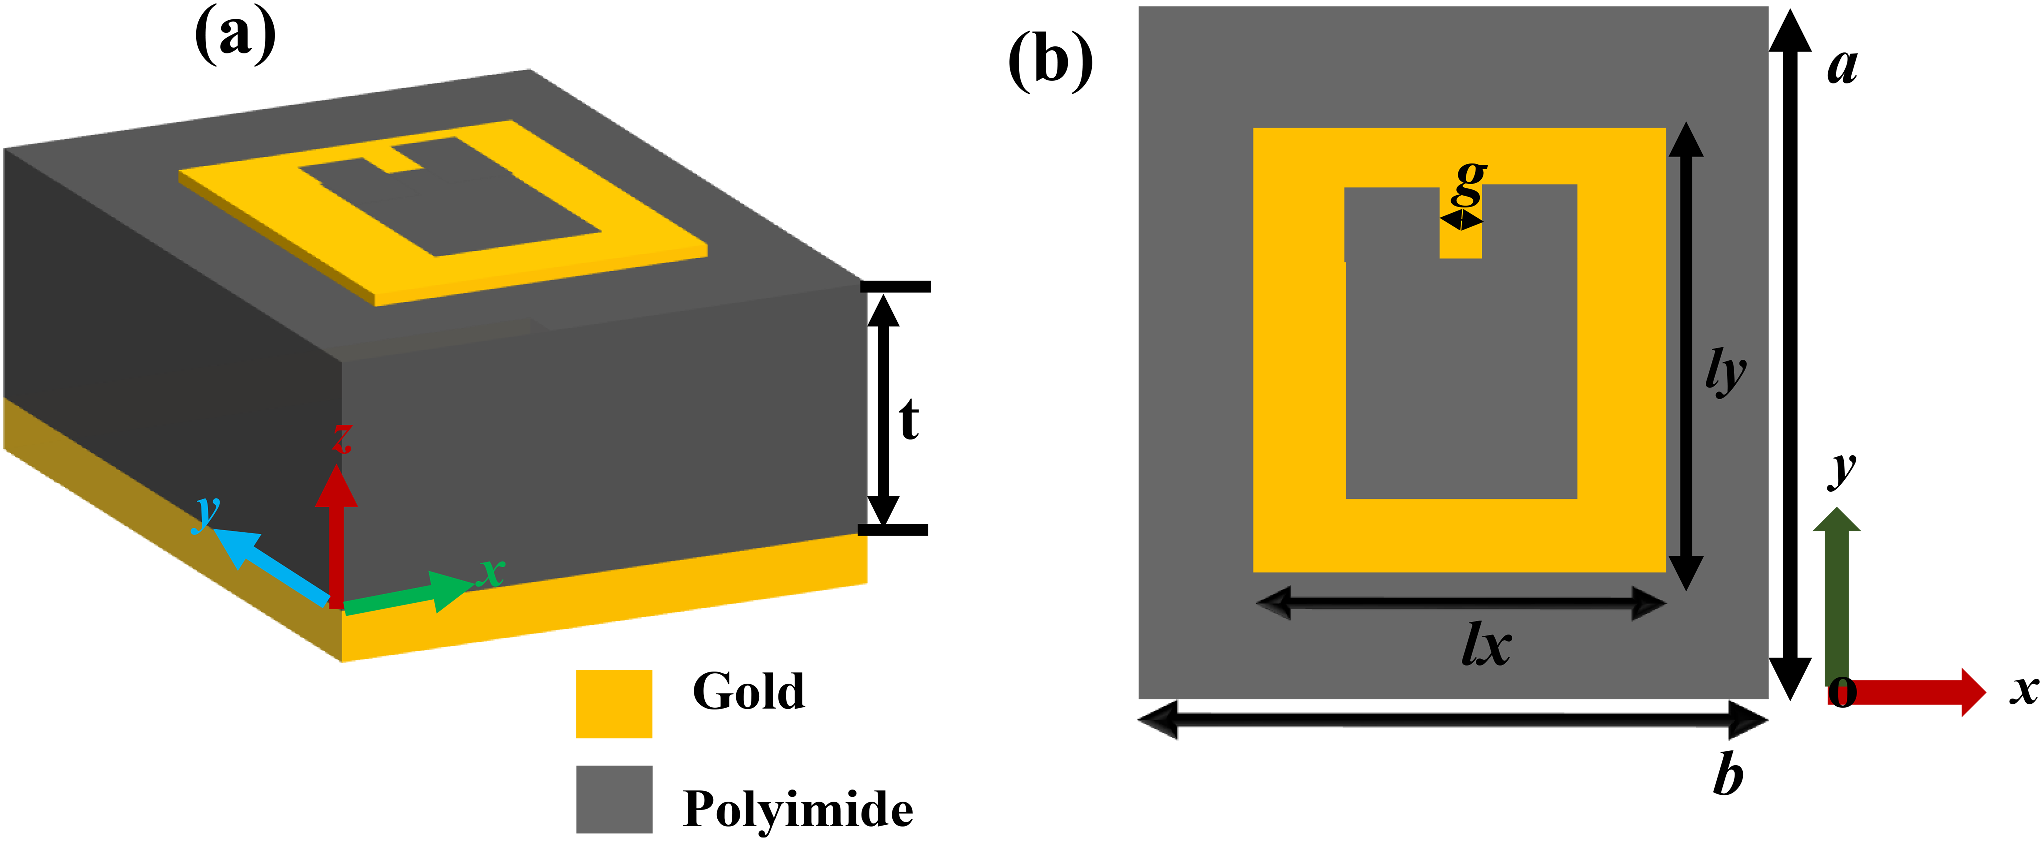 Bi-functional absorption performance of metamaterial structure based on metallic-square with U-shaped slot